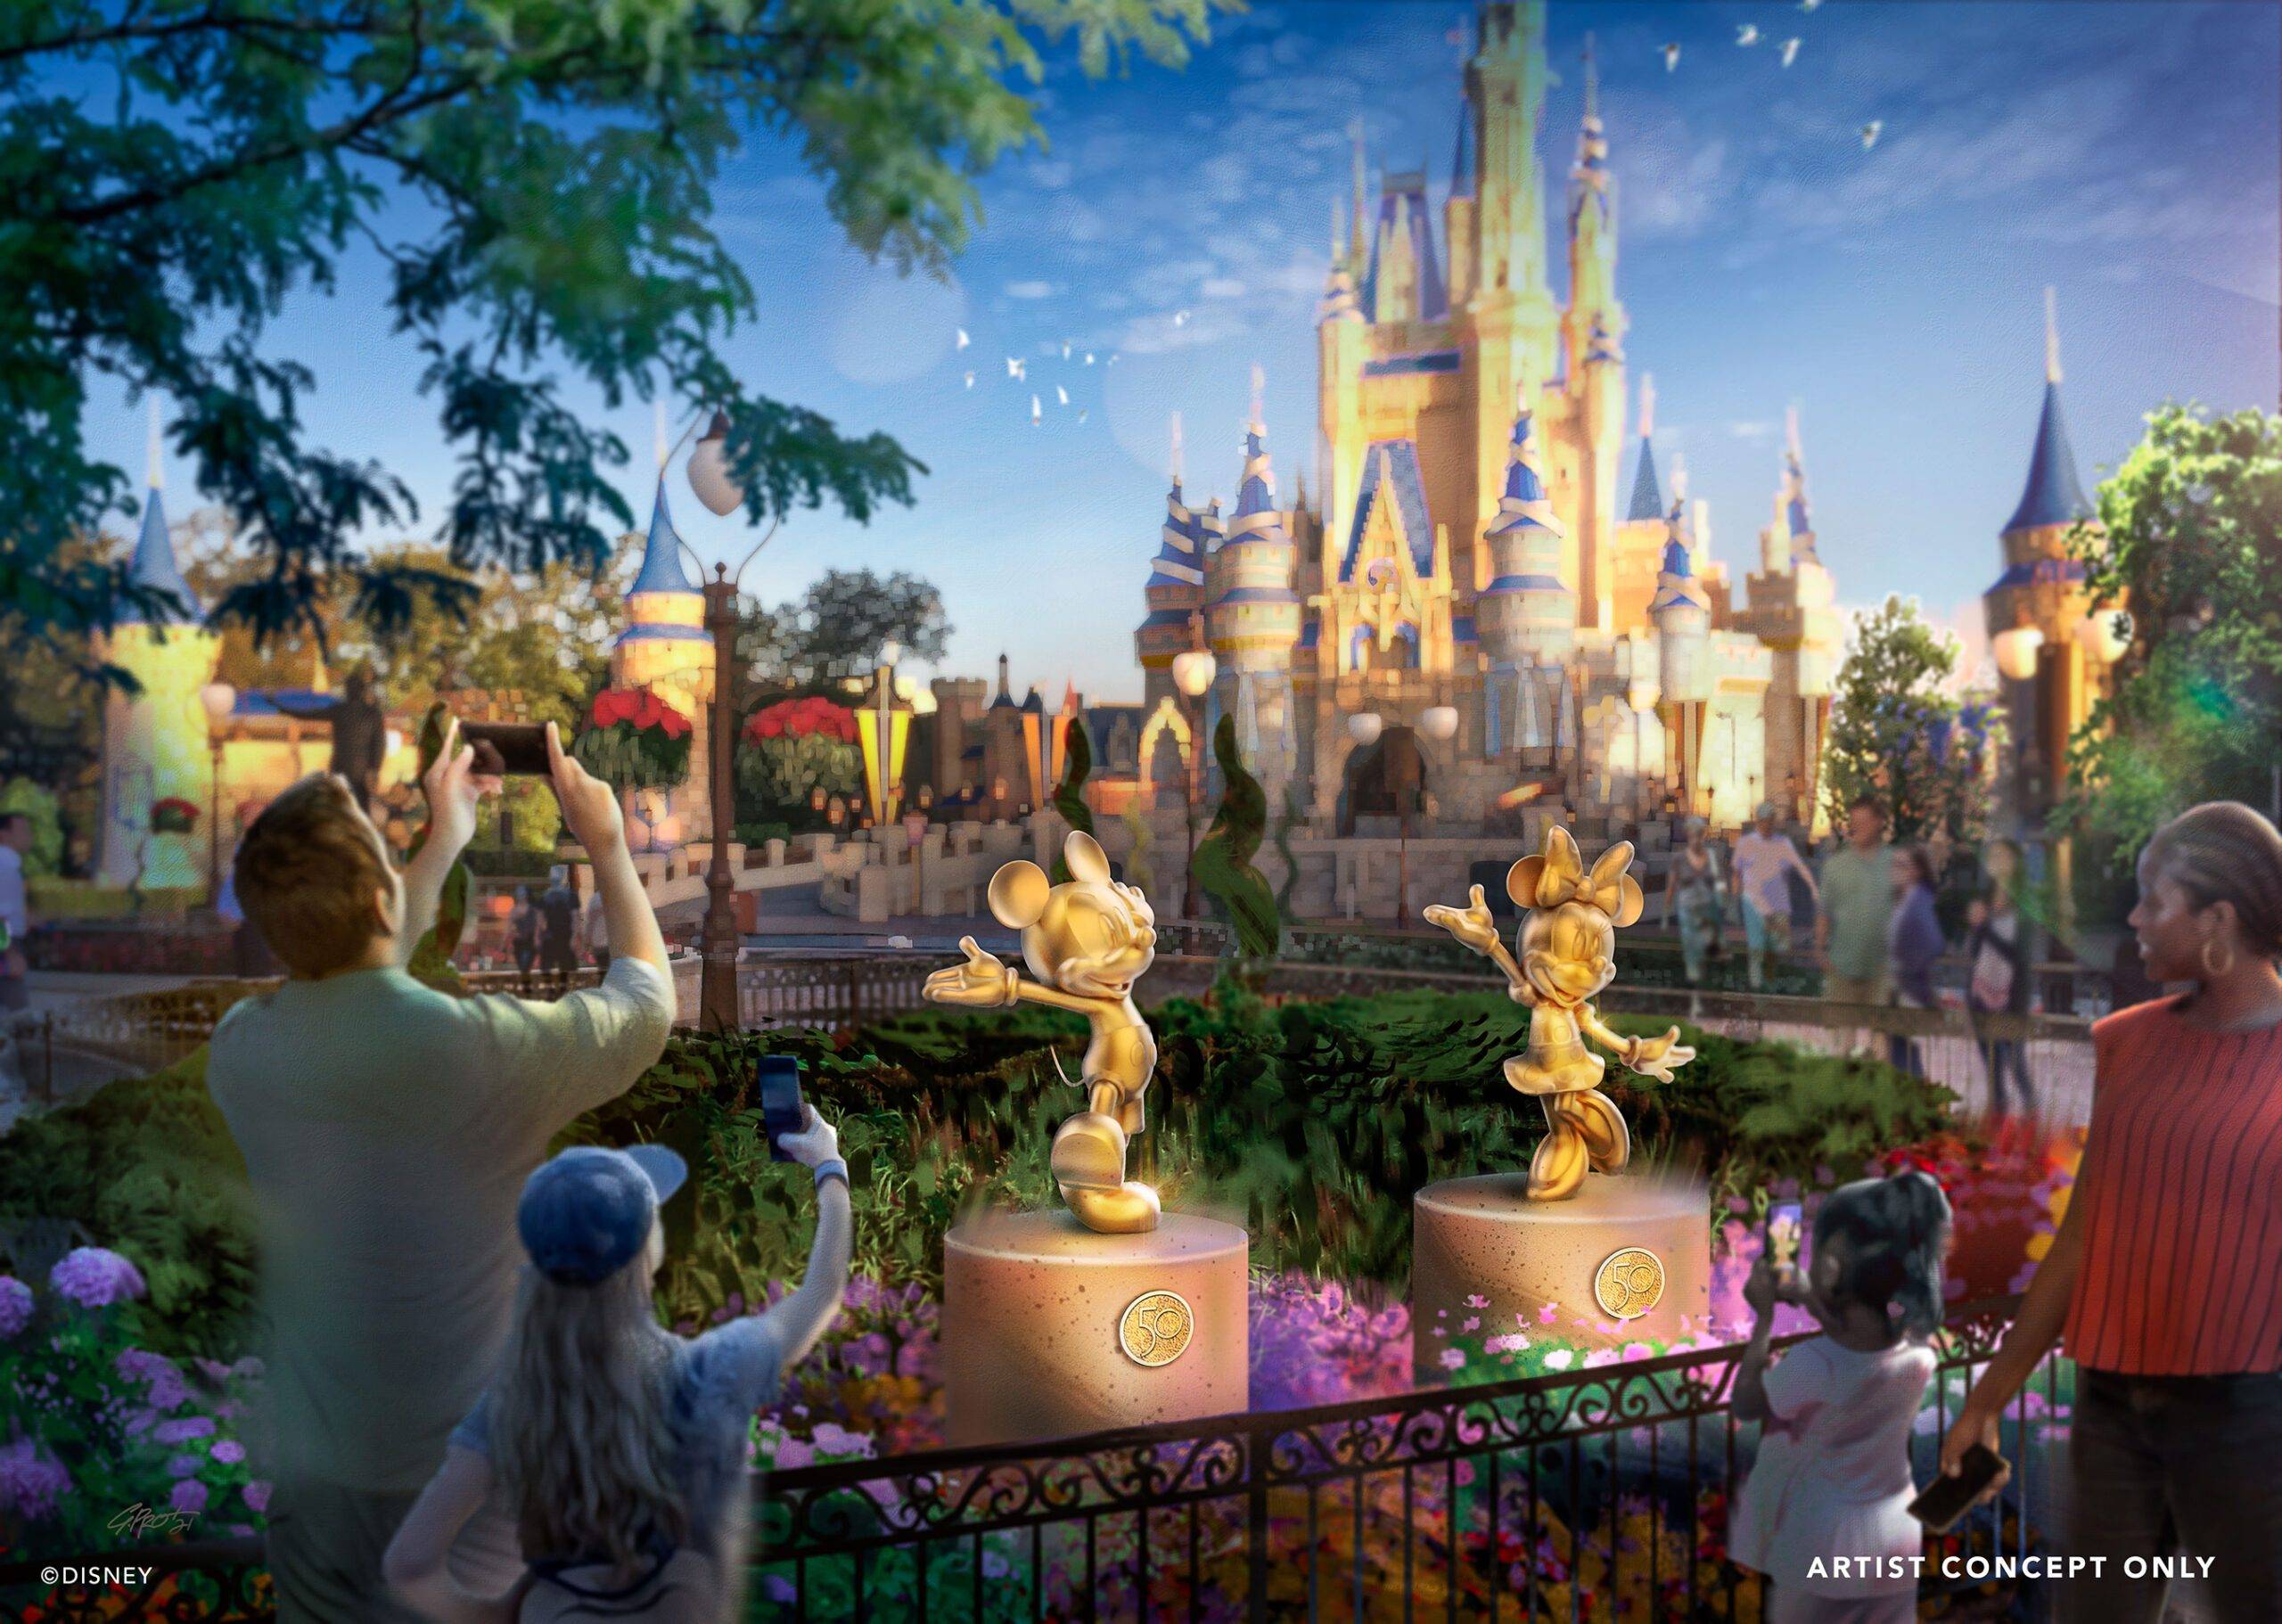 50 golden character sculptures will appear across all Walt Disney World theme parks as part of the 50th anniversary celebrations